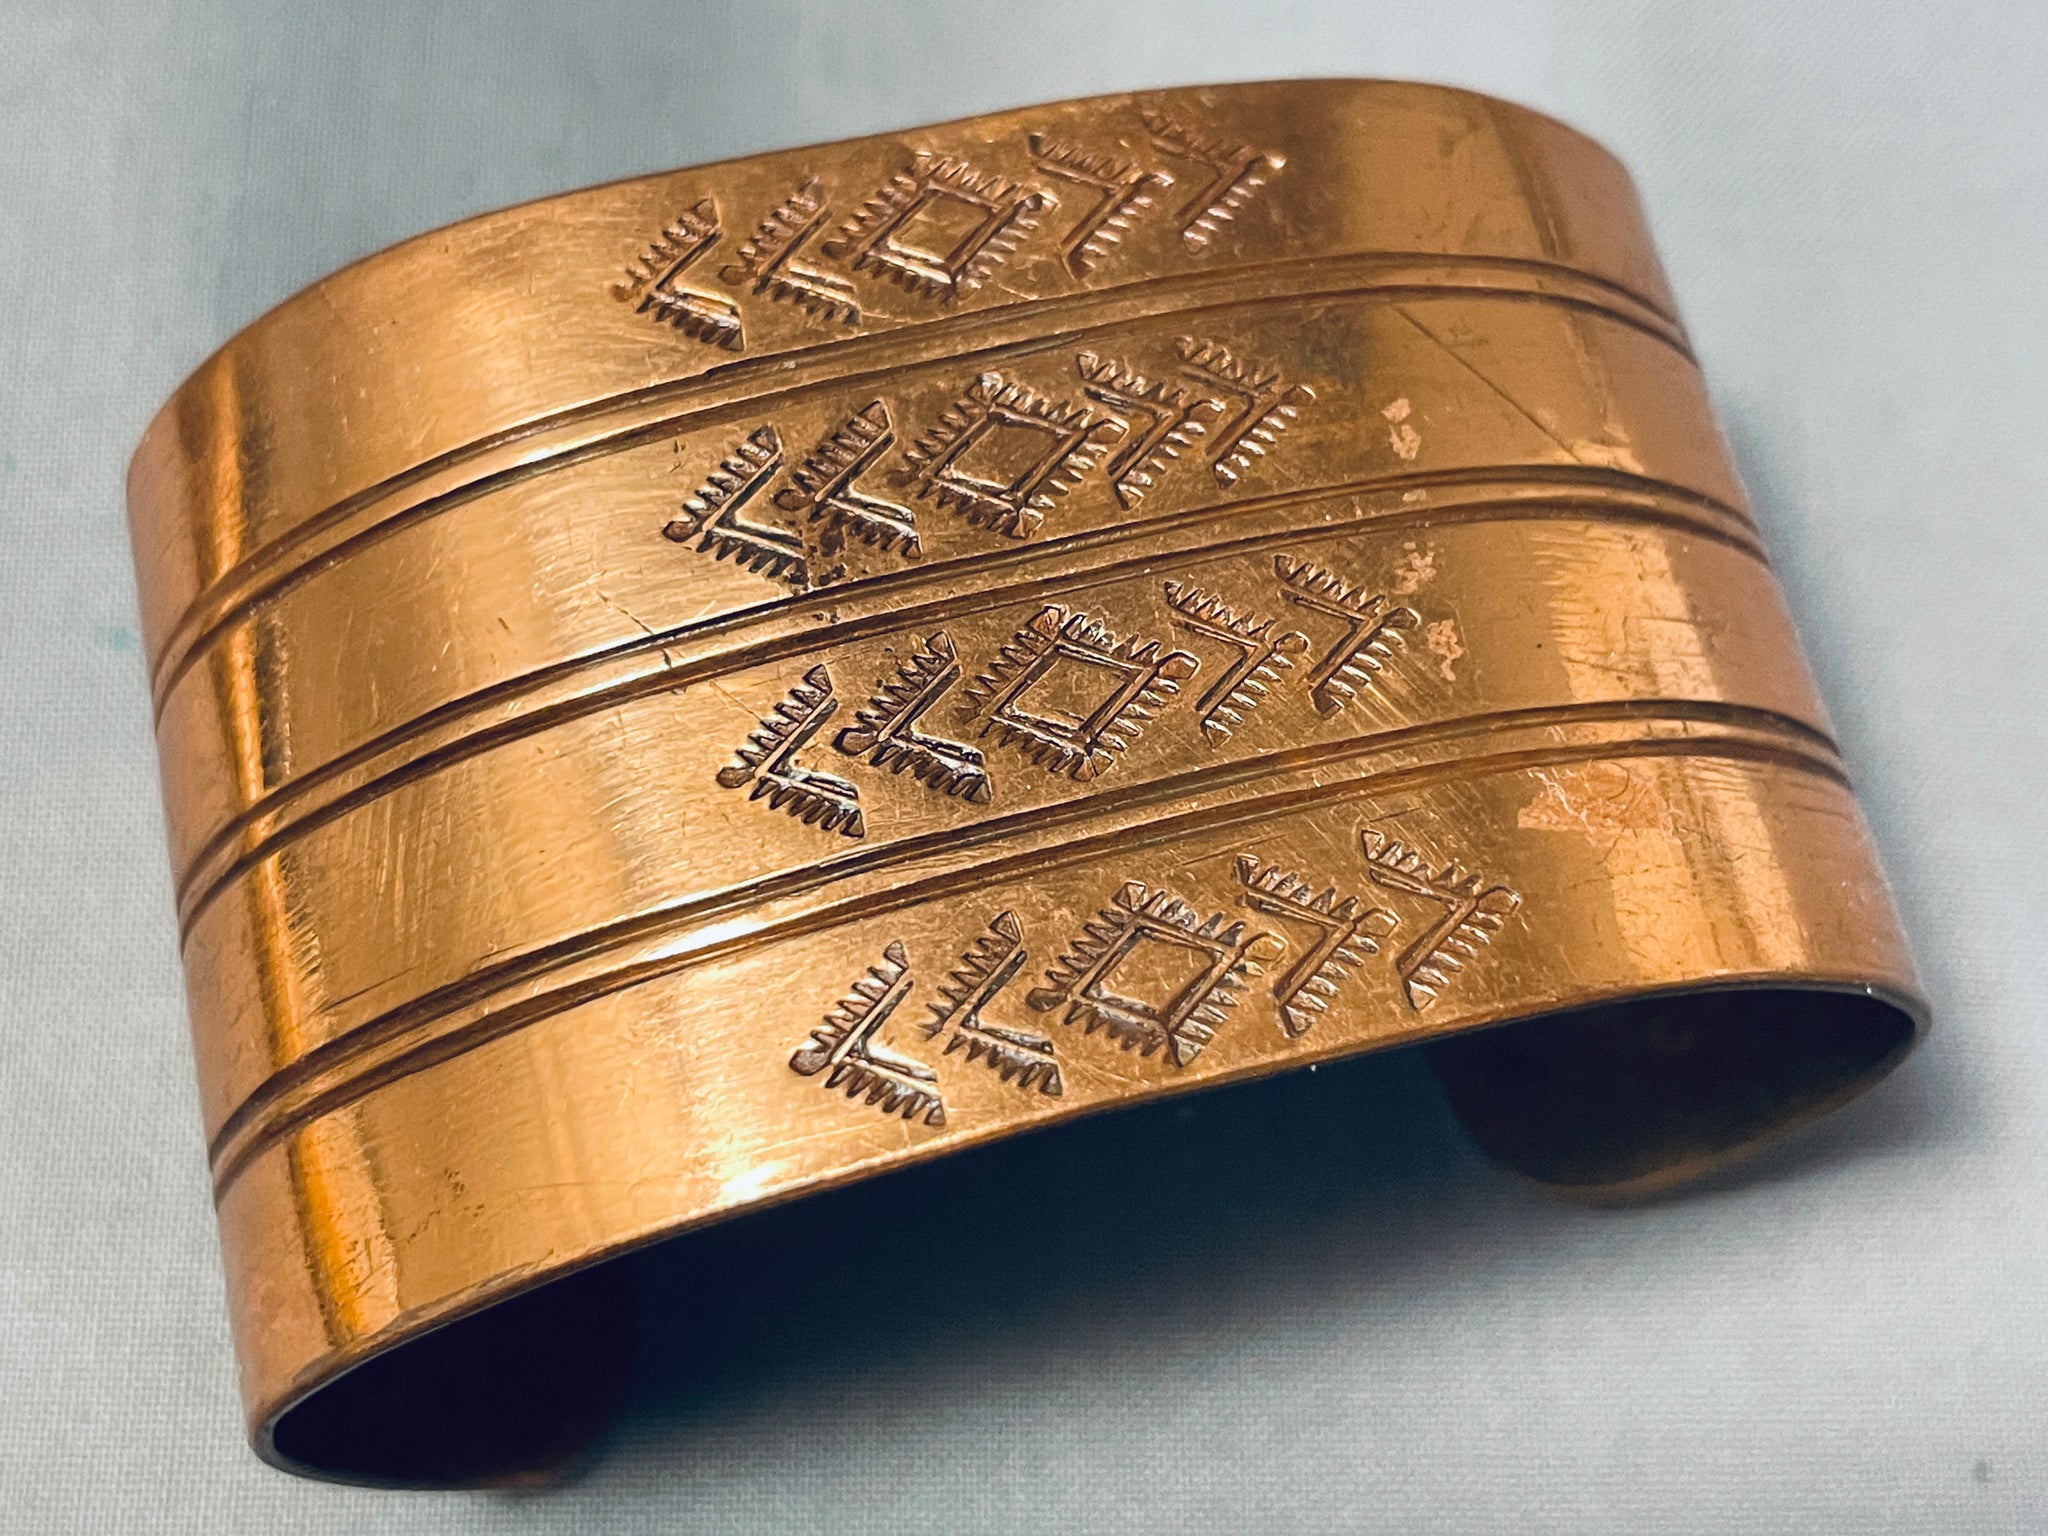 Viking Copper Magnetic Bracelet For Men And Women Healing Energy,  Adjustable Cuff Copper Bangle For Men For Arthritis Vintage Style Q0717  From Sihuai05, $7.65 | DHgate.Com